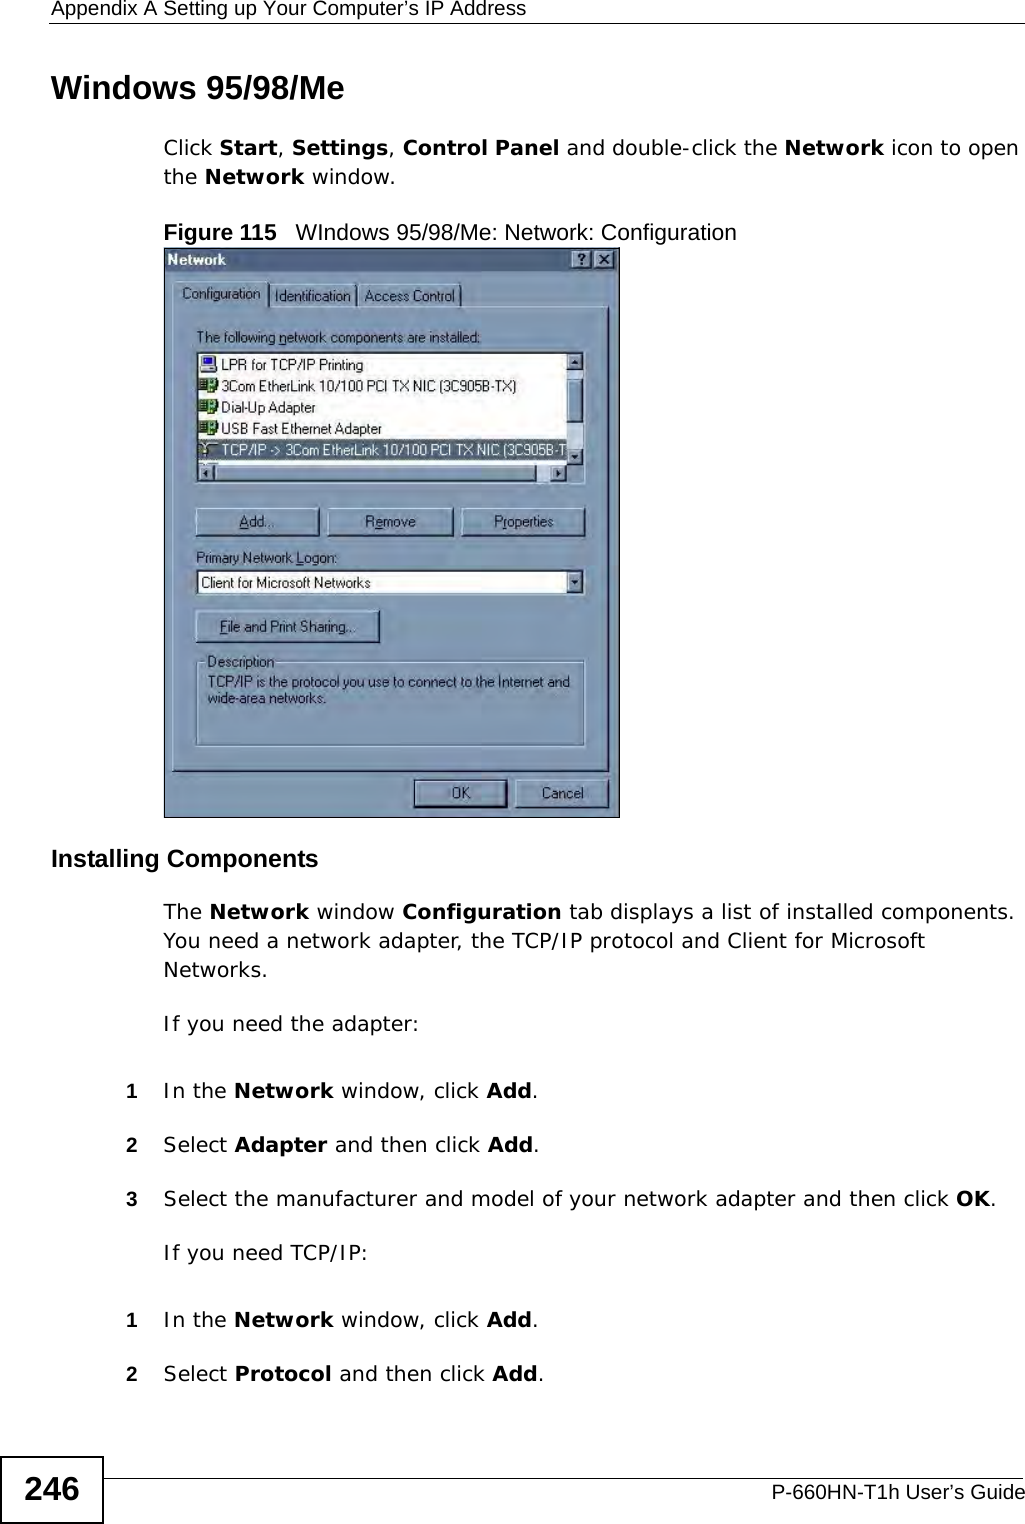 Appendix A Setting up Your Computer’s IP AddressP-660HN-T1h User’s Guide246Windows 95/98/MeClick Start, Settings, Control Panel and double-click the Network icon to open the Network window.Figure 115   WIndows 95/98/Me: Network: ConfigurationInstalling ComponentsThe Network window Configuration tab displays a list of installed components. You need a network adapter, the TCP/IP protocol and Client for Microsoft Networks.If you need the adapter:1In the Network window, click Add.2Select Adapter and then click Add.3Select the manufacturer and model of your network adapter and then click OK.If you need TCP/IP:1In the Network window, click Add.2Select Protocol and then click Add.